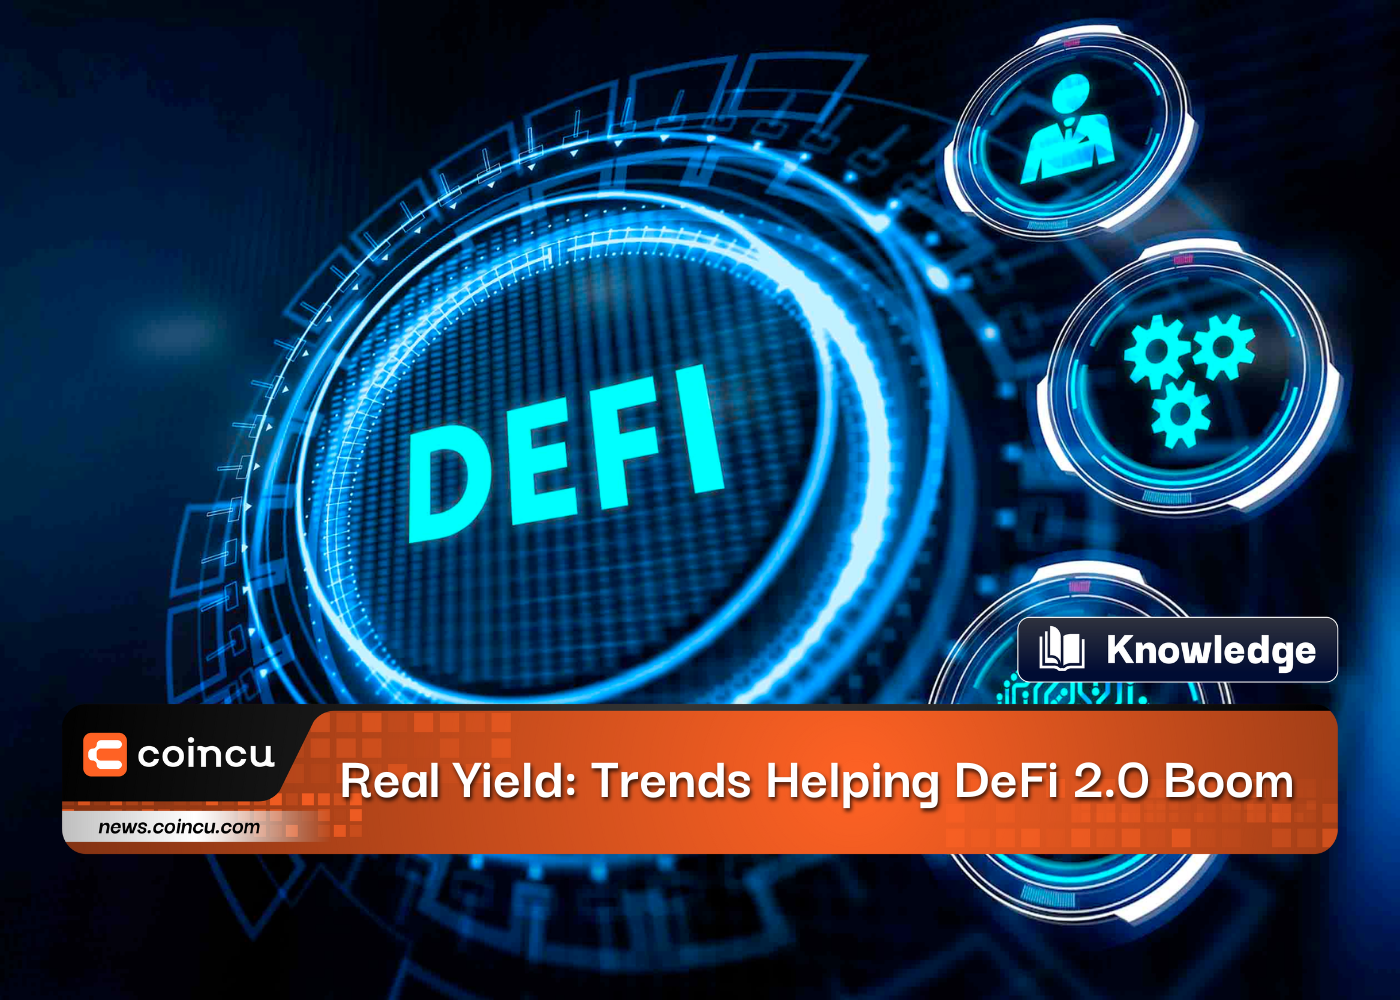 Real Yield: Trends Helping DeFi 2.0 Boom